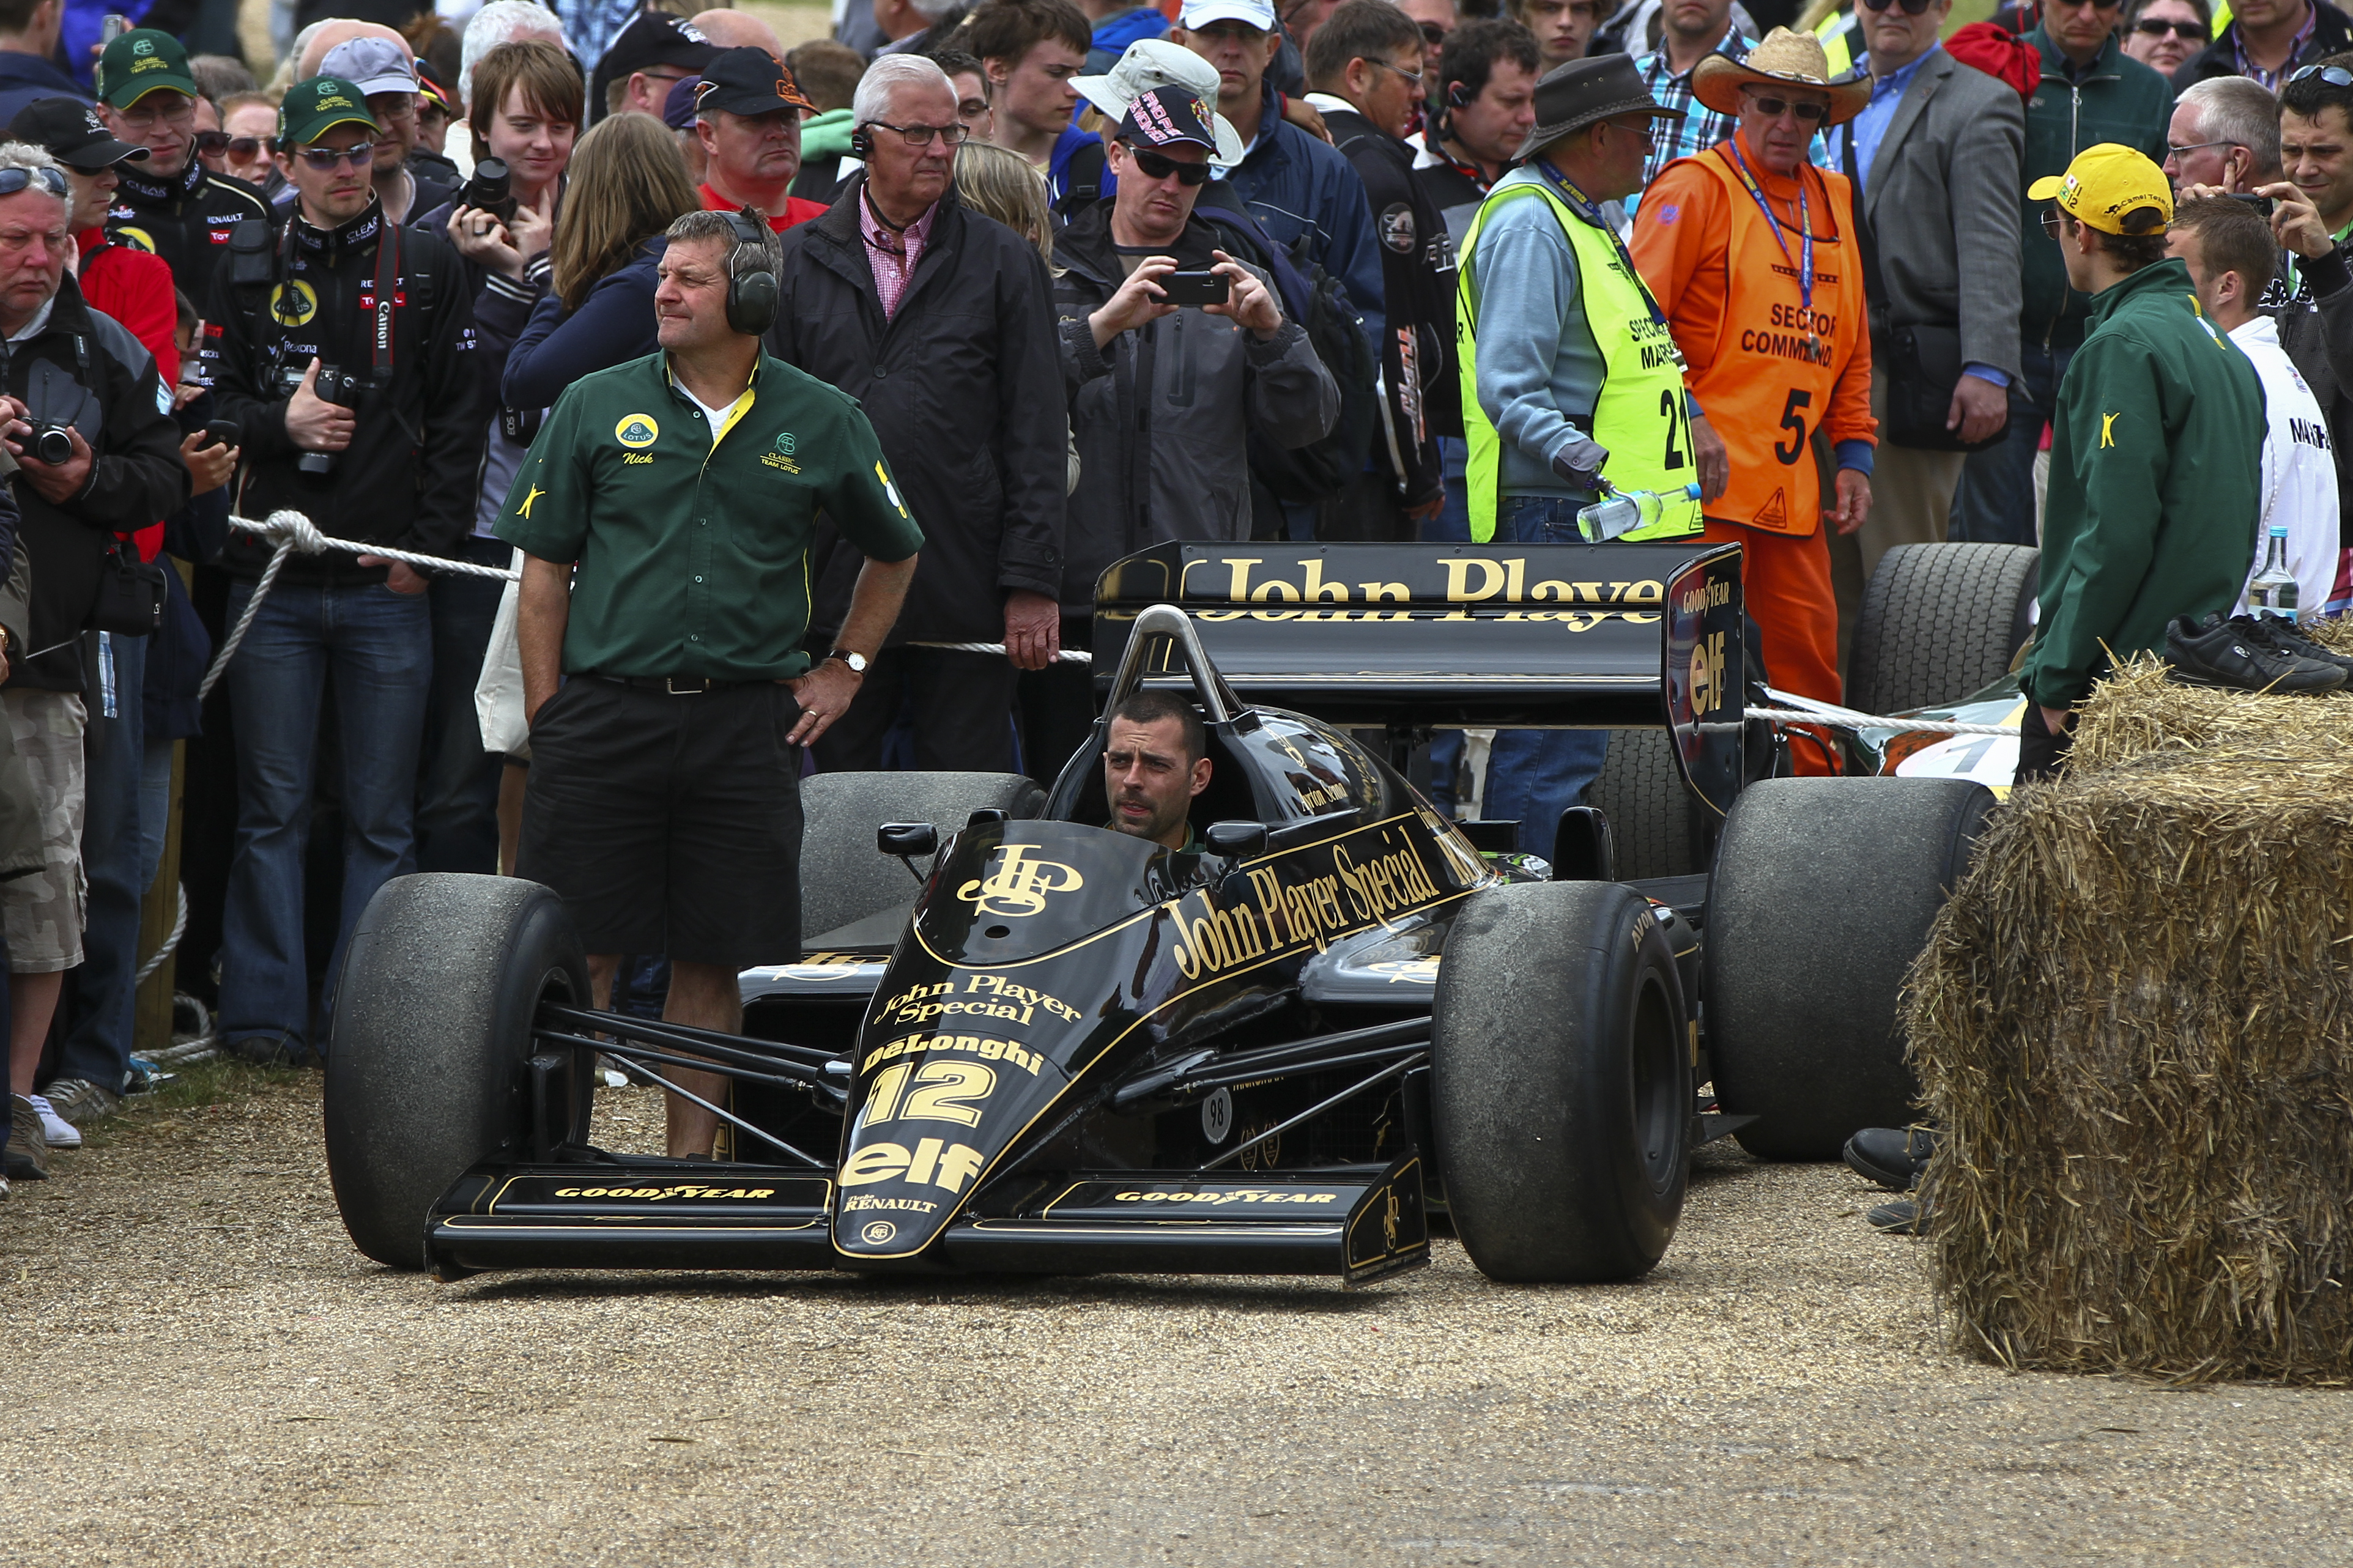 File:Lotus 98T at Goodwood FOS 2012.jpg - Wikimedia Commons